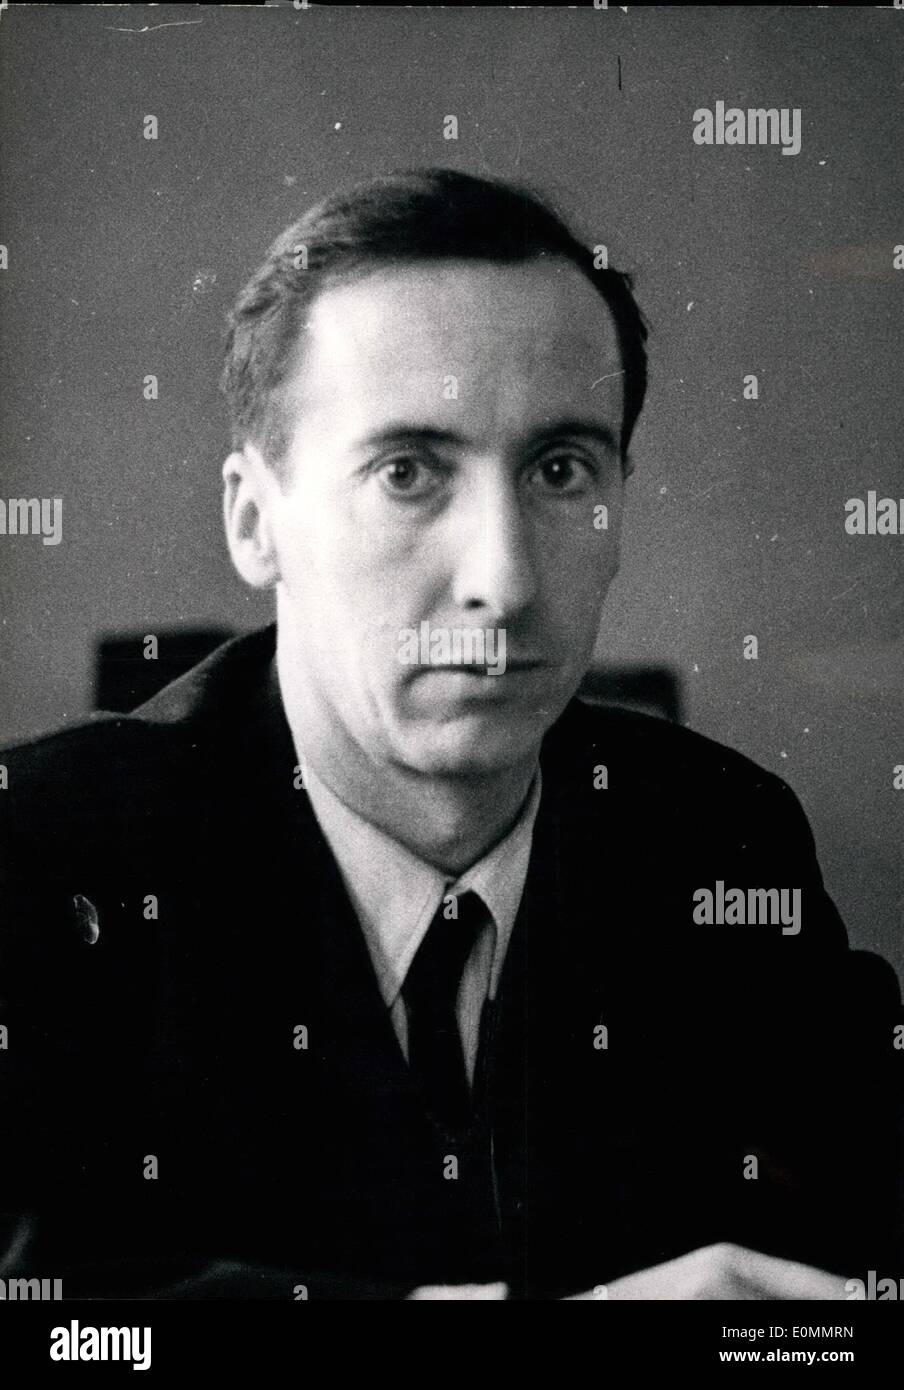 Mar. 03, 1956 - Editor of a Paris Progressive Weekly Arrested For ''Demoralization of French Army'': M. Claude Bourdet, Editor-in-Chief of ''France -Observateur'' was arrested this morning on the charge of Publishing Articles tending to Demoralize The French Army. Picture Shows: A recent Portrait of M. Claude Bourdet. Stock Photo